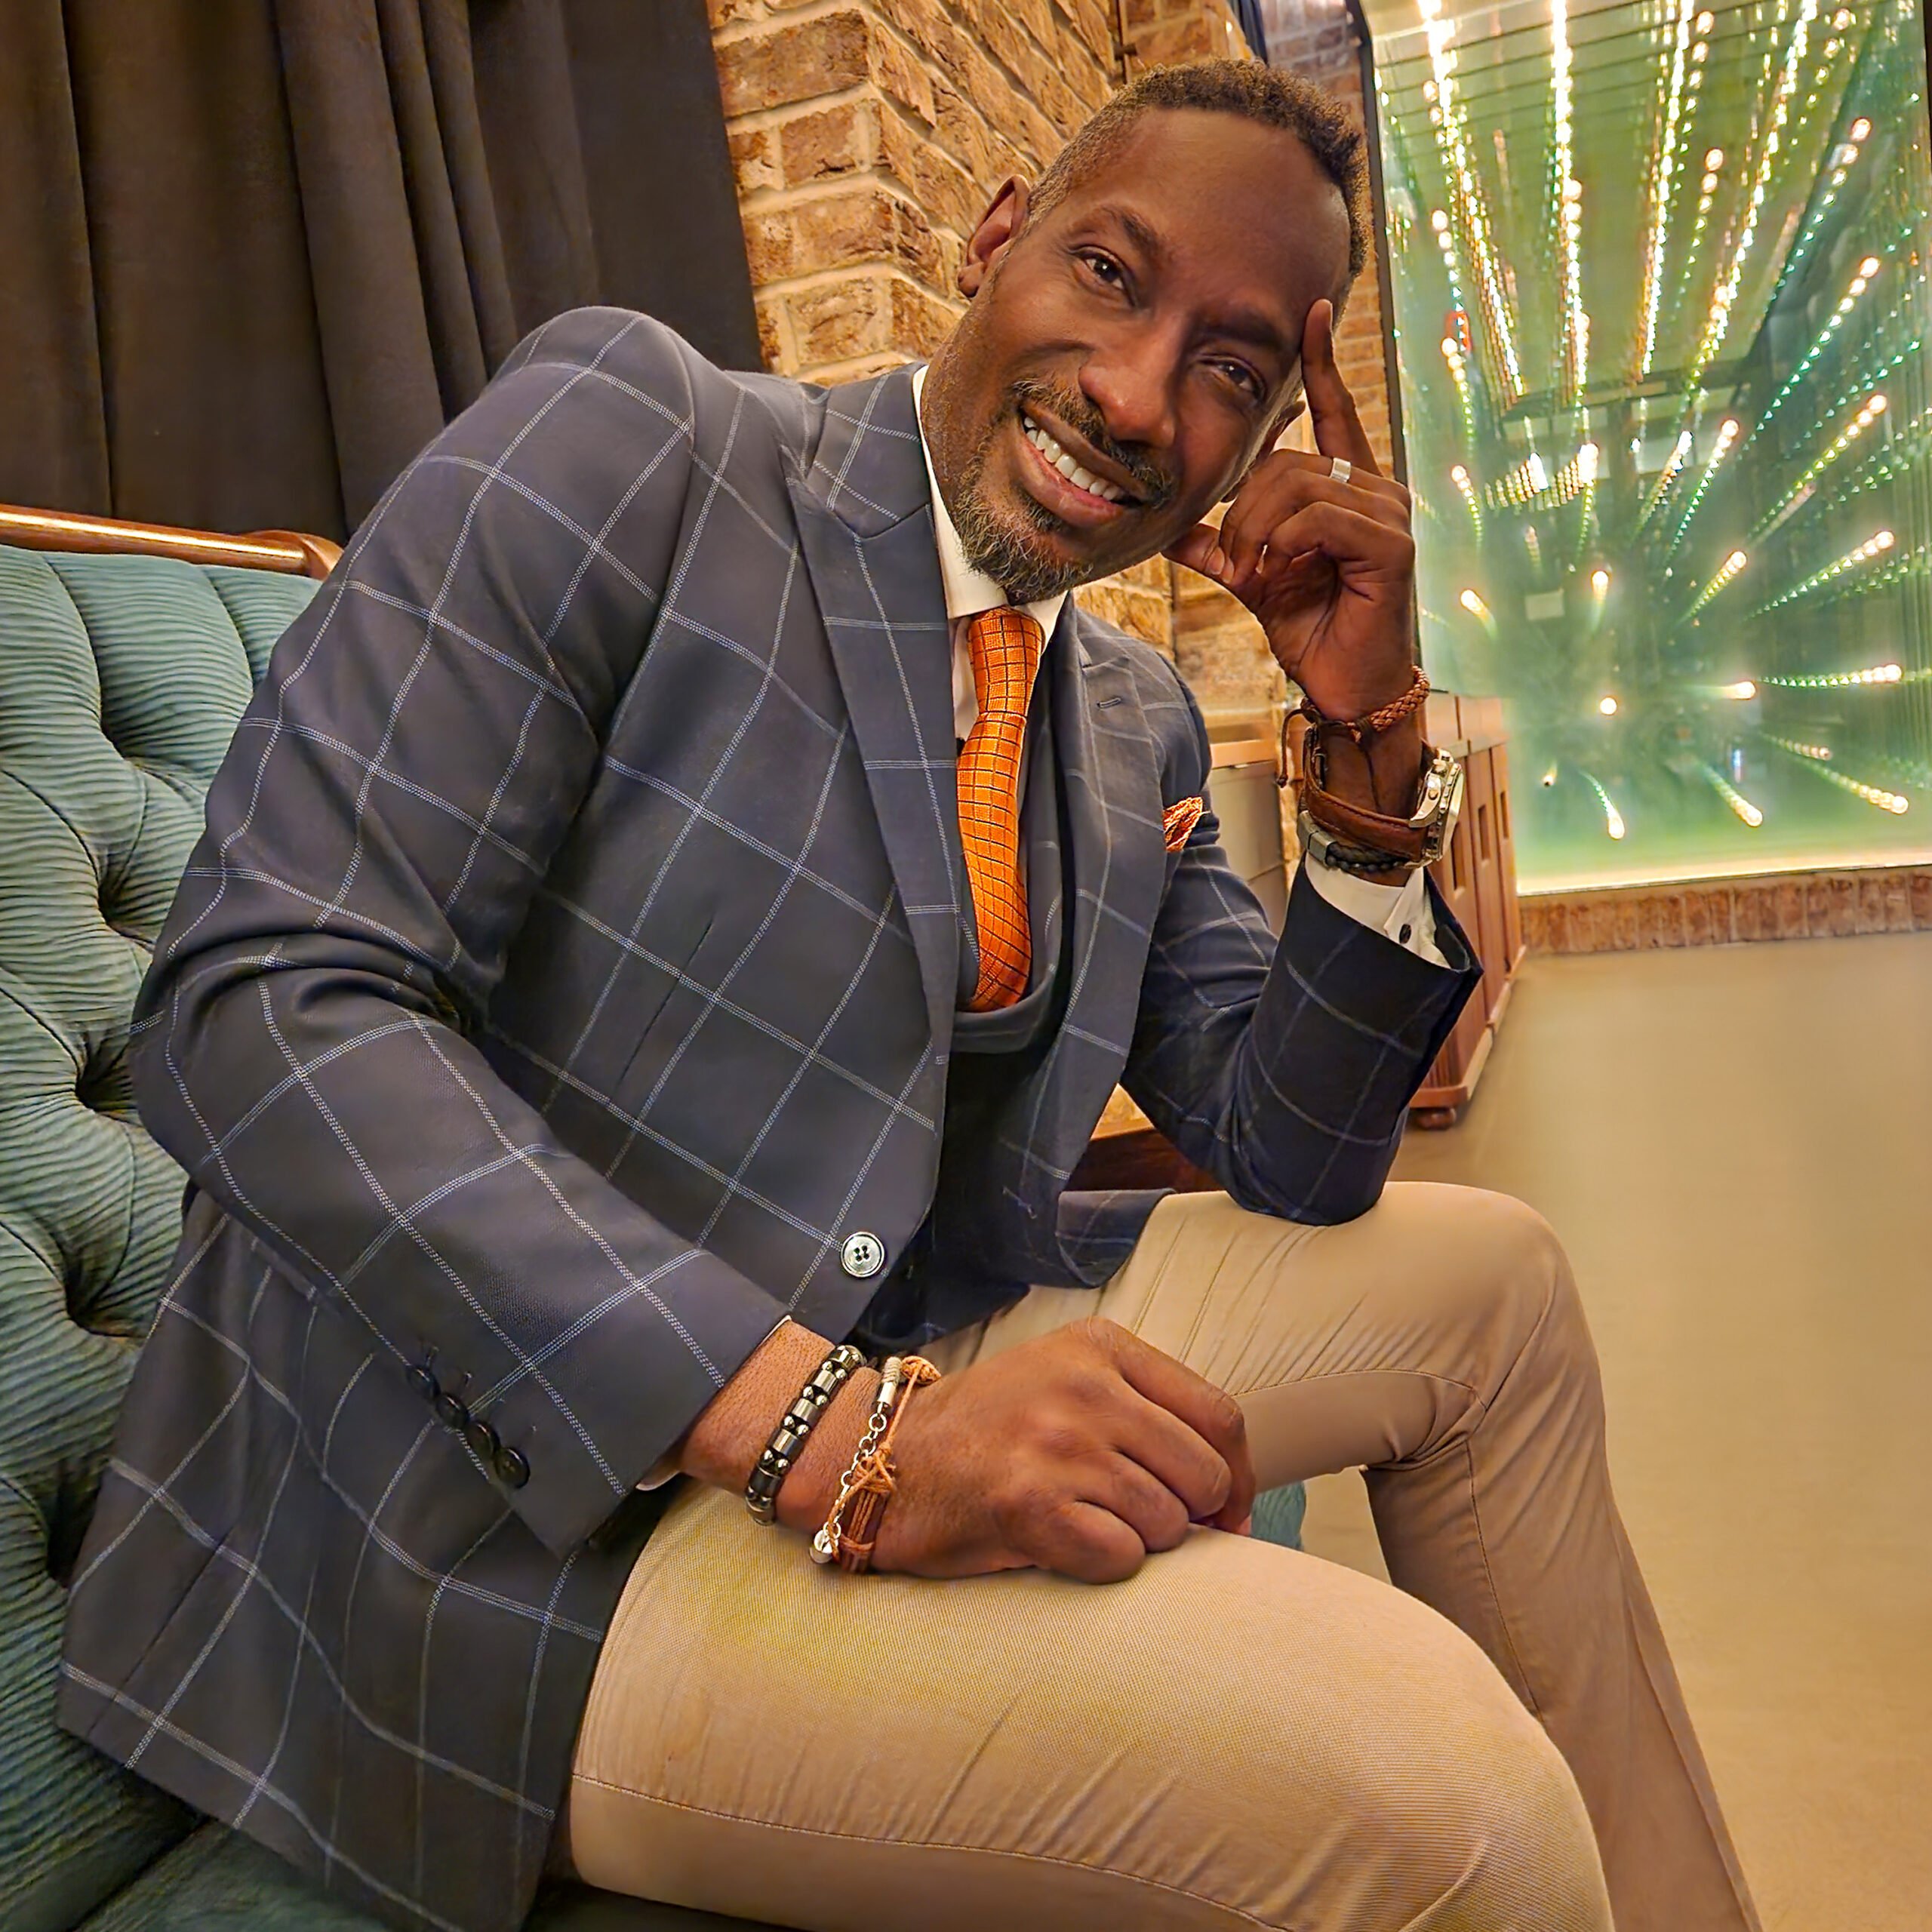 Orator and nightlife curator Arthur J. Rutledge, captured by photographer Vaughn Lowery, prepares to embark on his next endeavor at the Civilian Hotel.